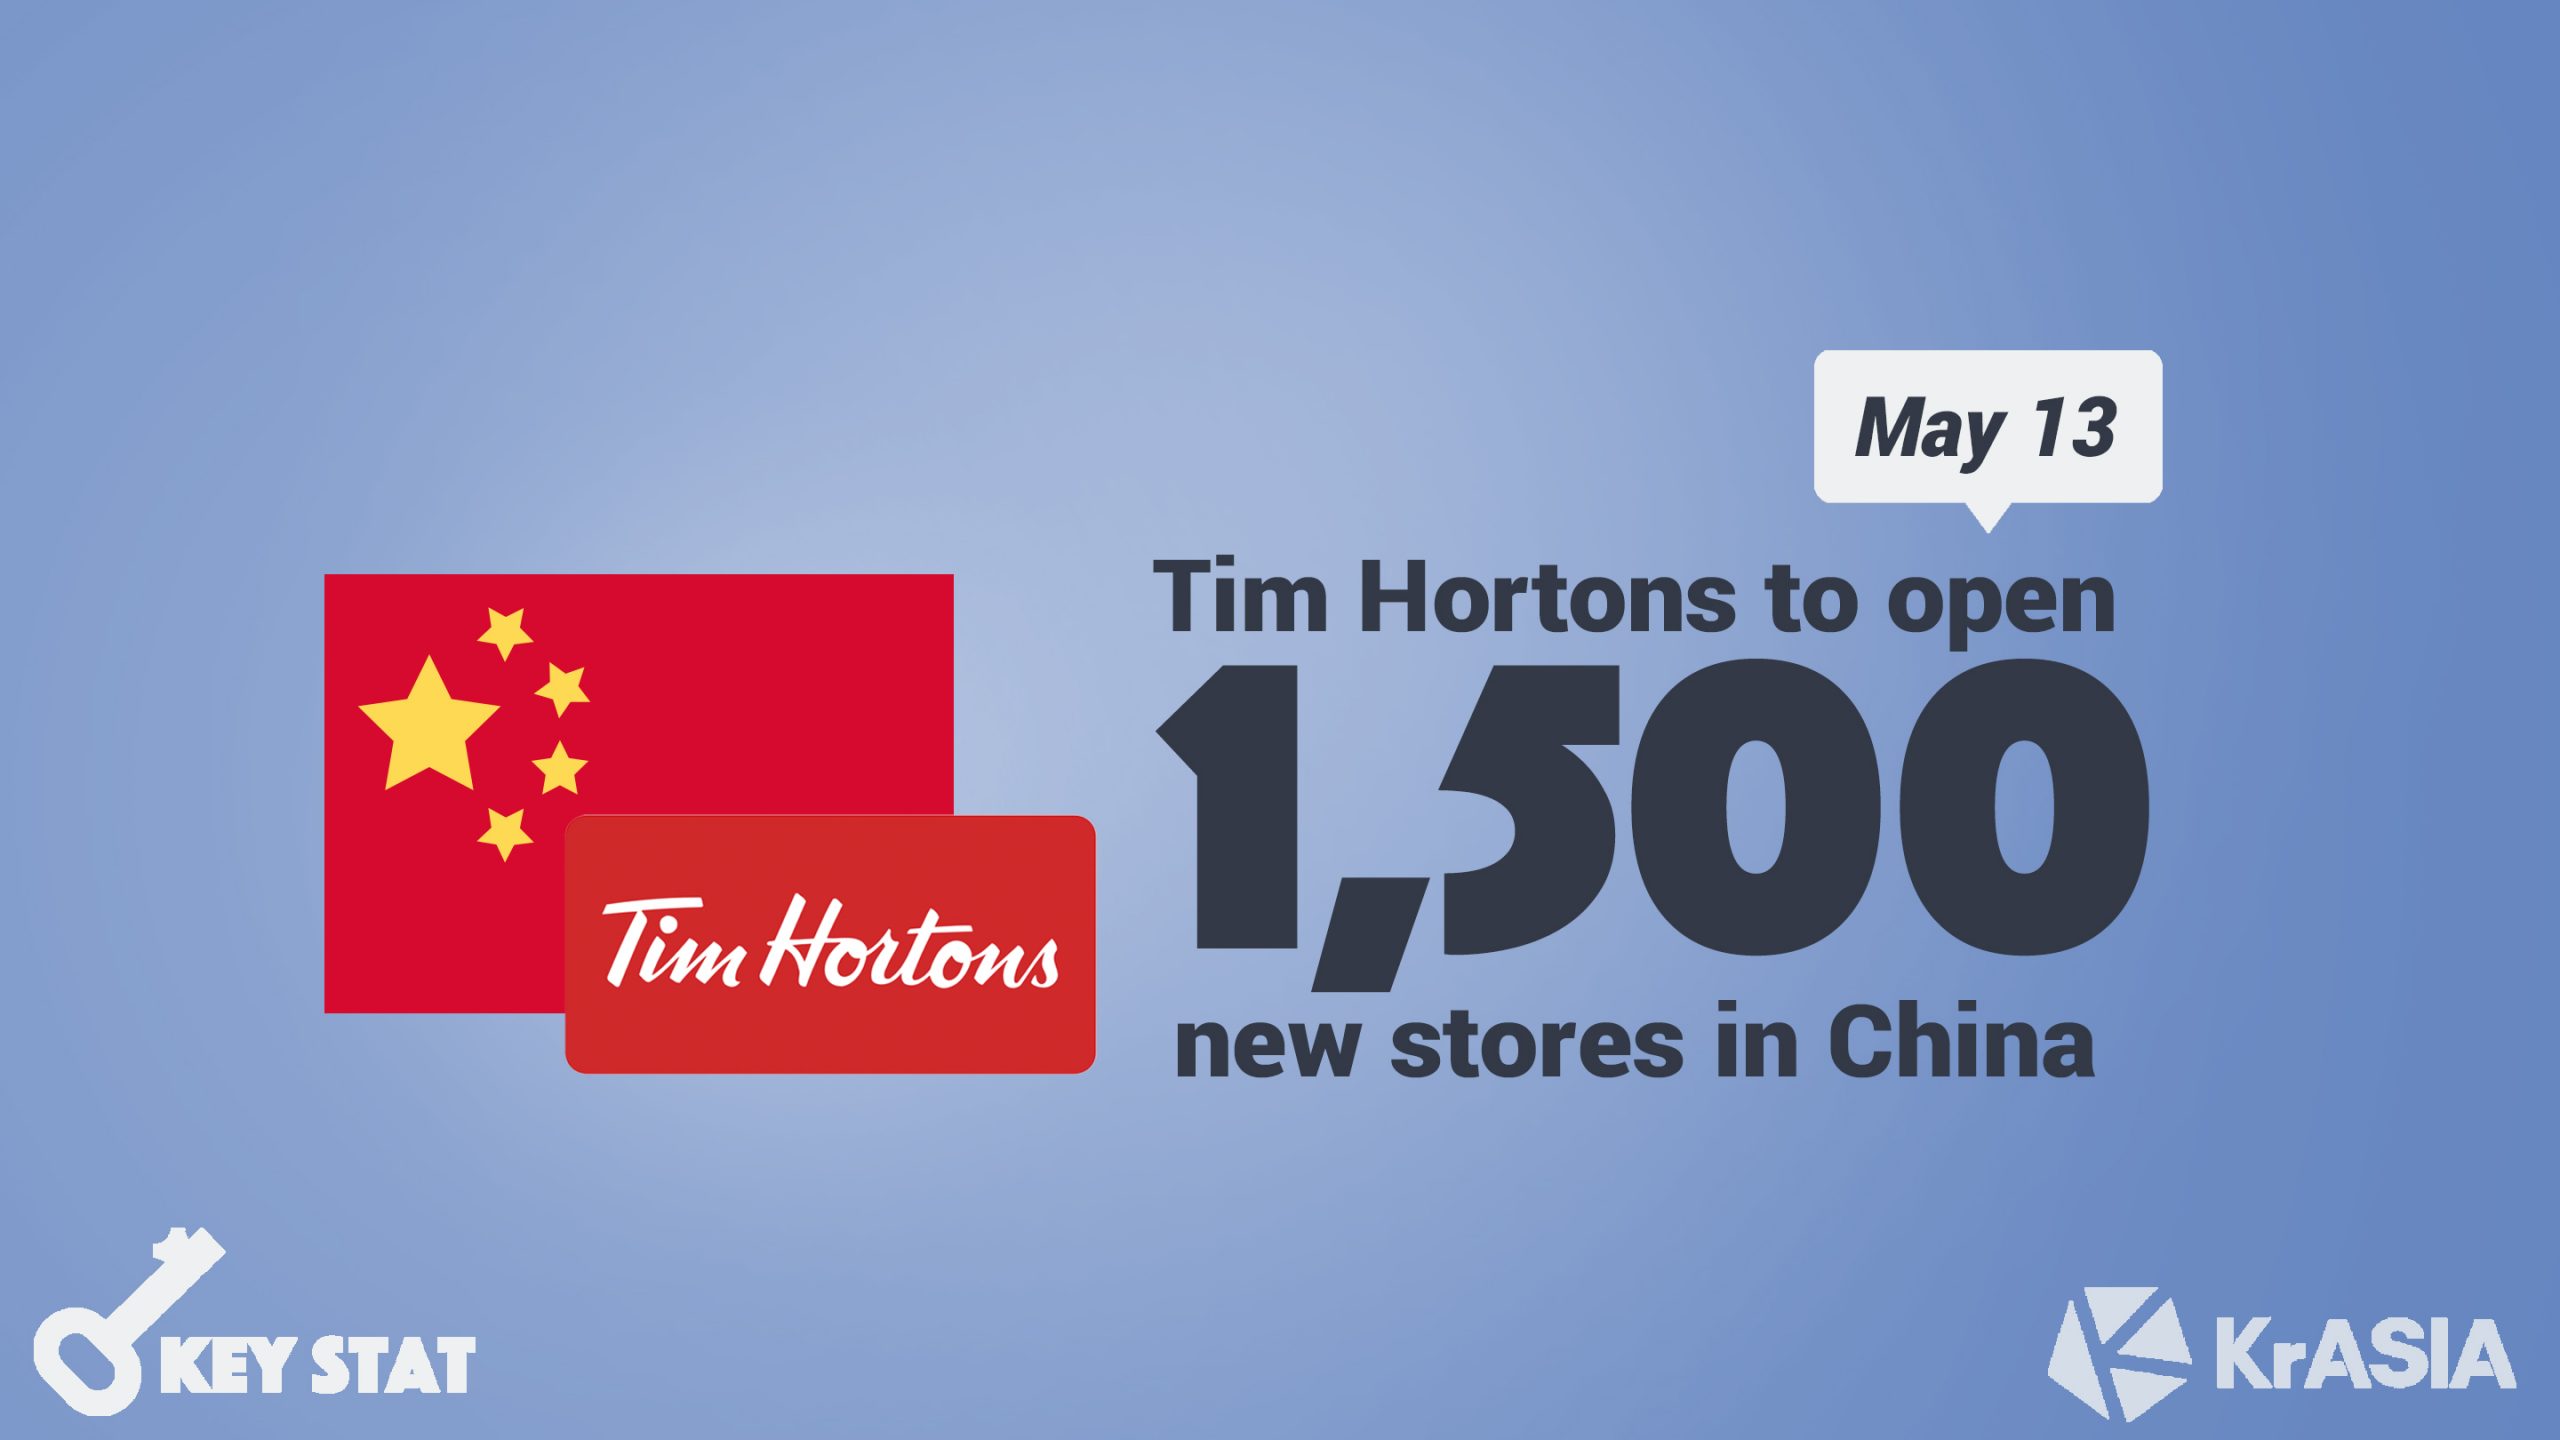 KEY STAT | Tencent to aid Tim Hortons’ expansion in China